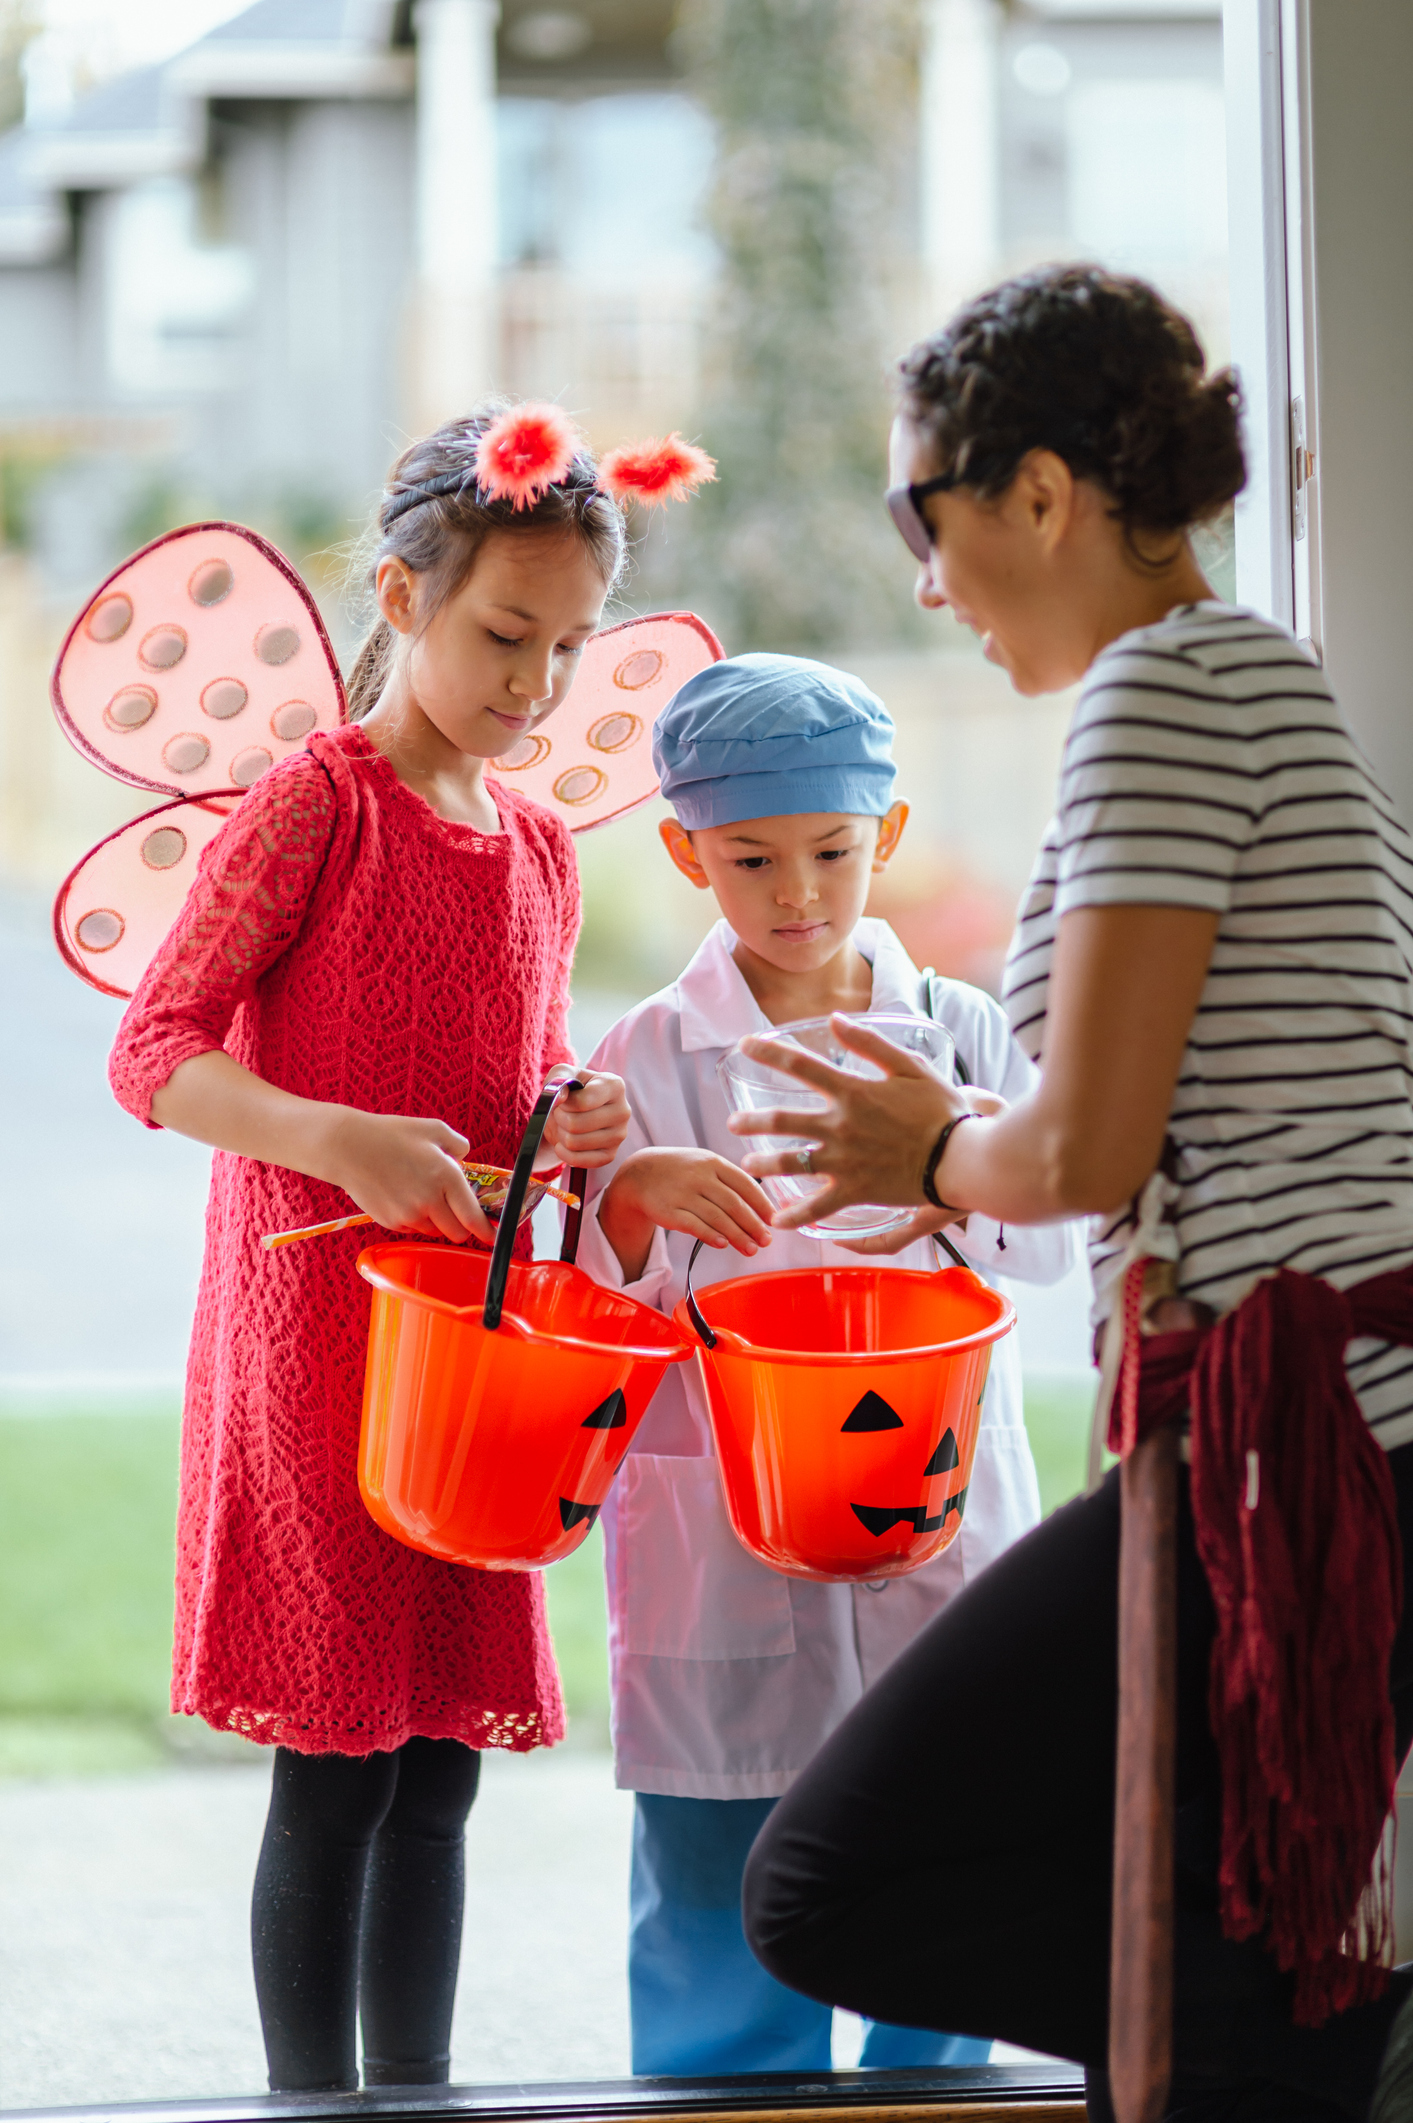 Adorable children trick or treating